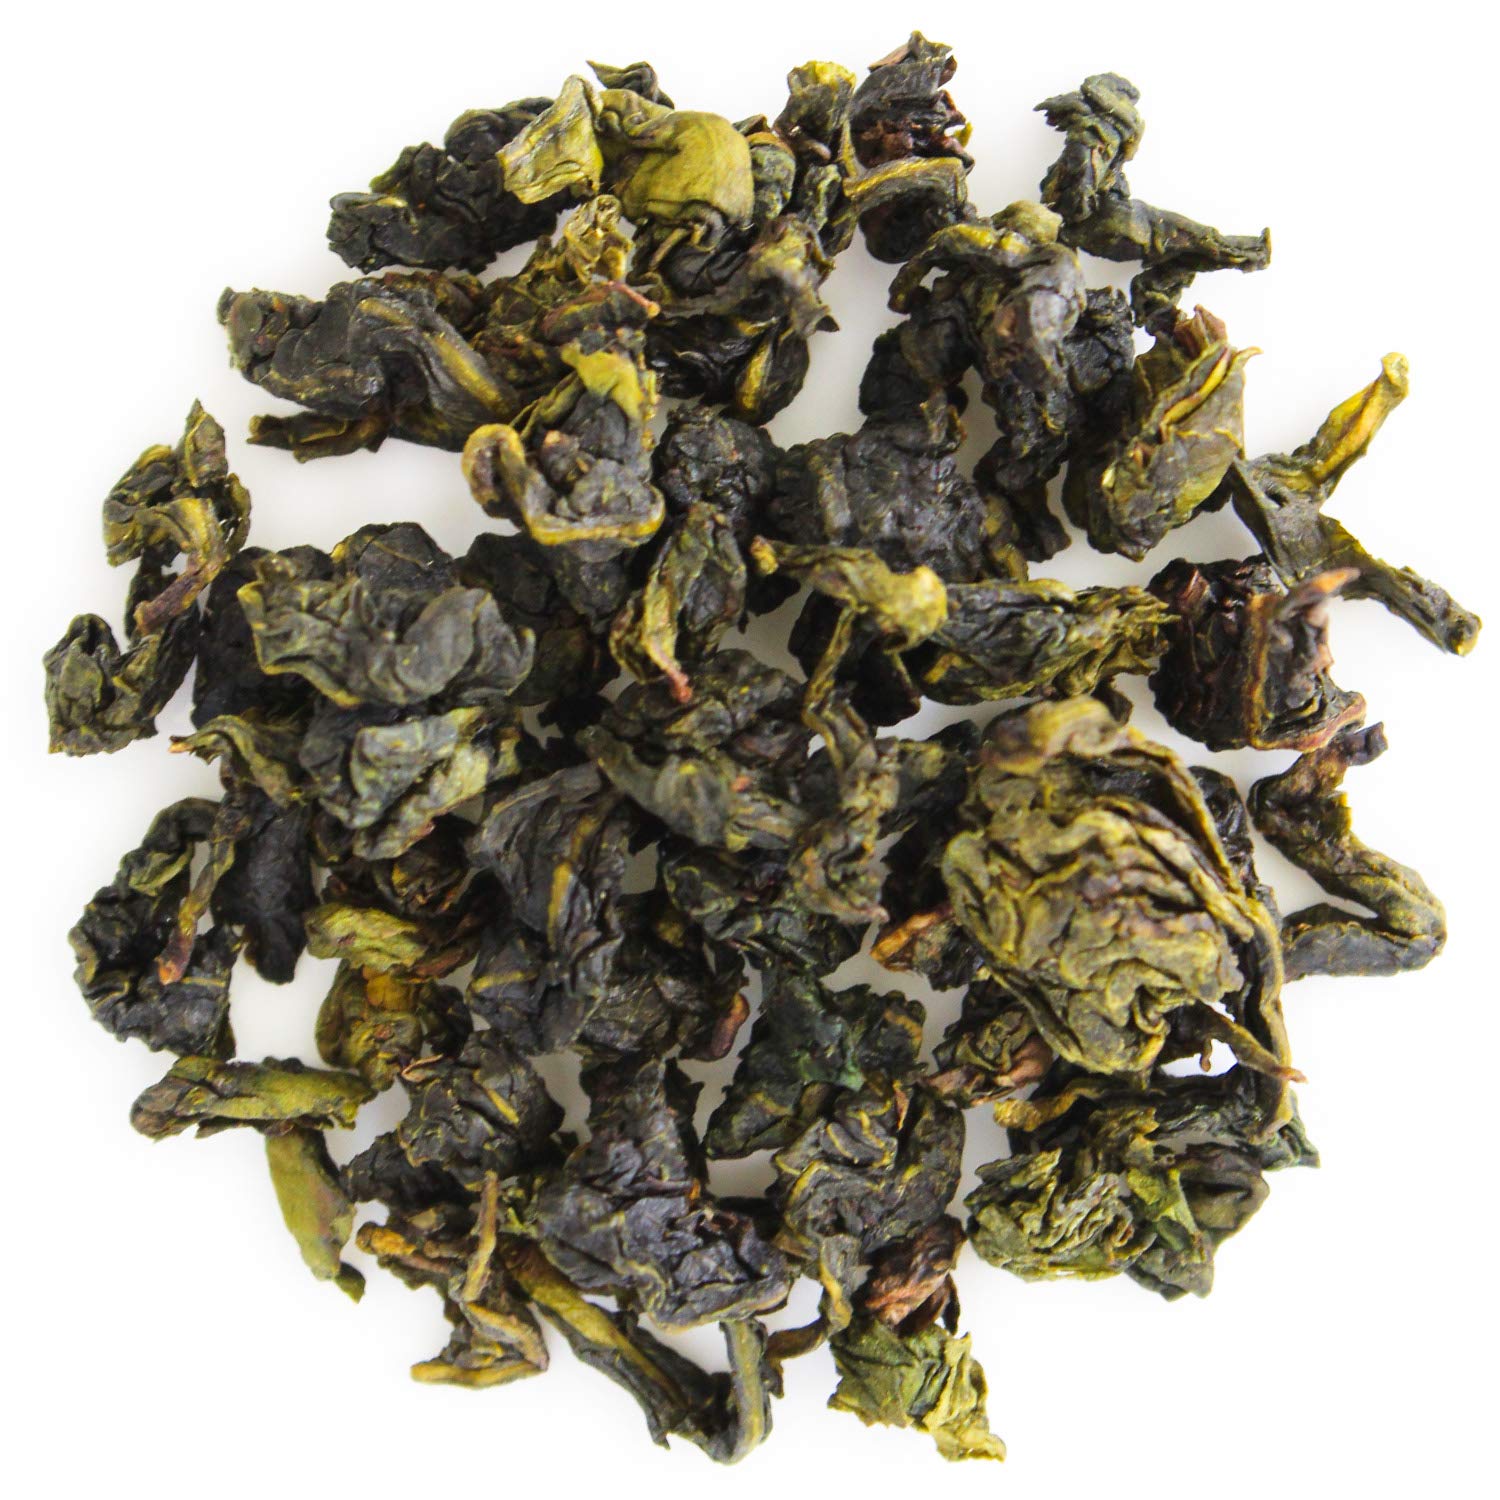 Teabloom Organic Oolong Tea, Milky Oolong Loose Leaf Tea, Rolled Leaves Famous for its Milky Taste and Silky Texture, USDA Organic, Rare Single-Origin Tea in Reusable Gift Canister, 3.53 oz/100 g Canister Makes 35-50 Cups